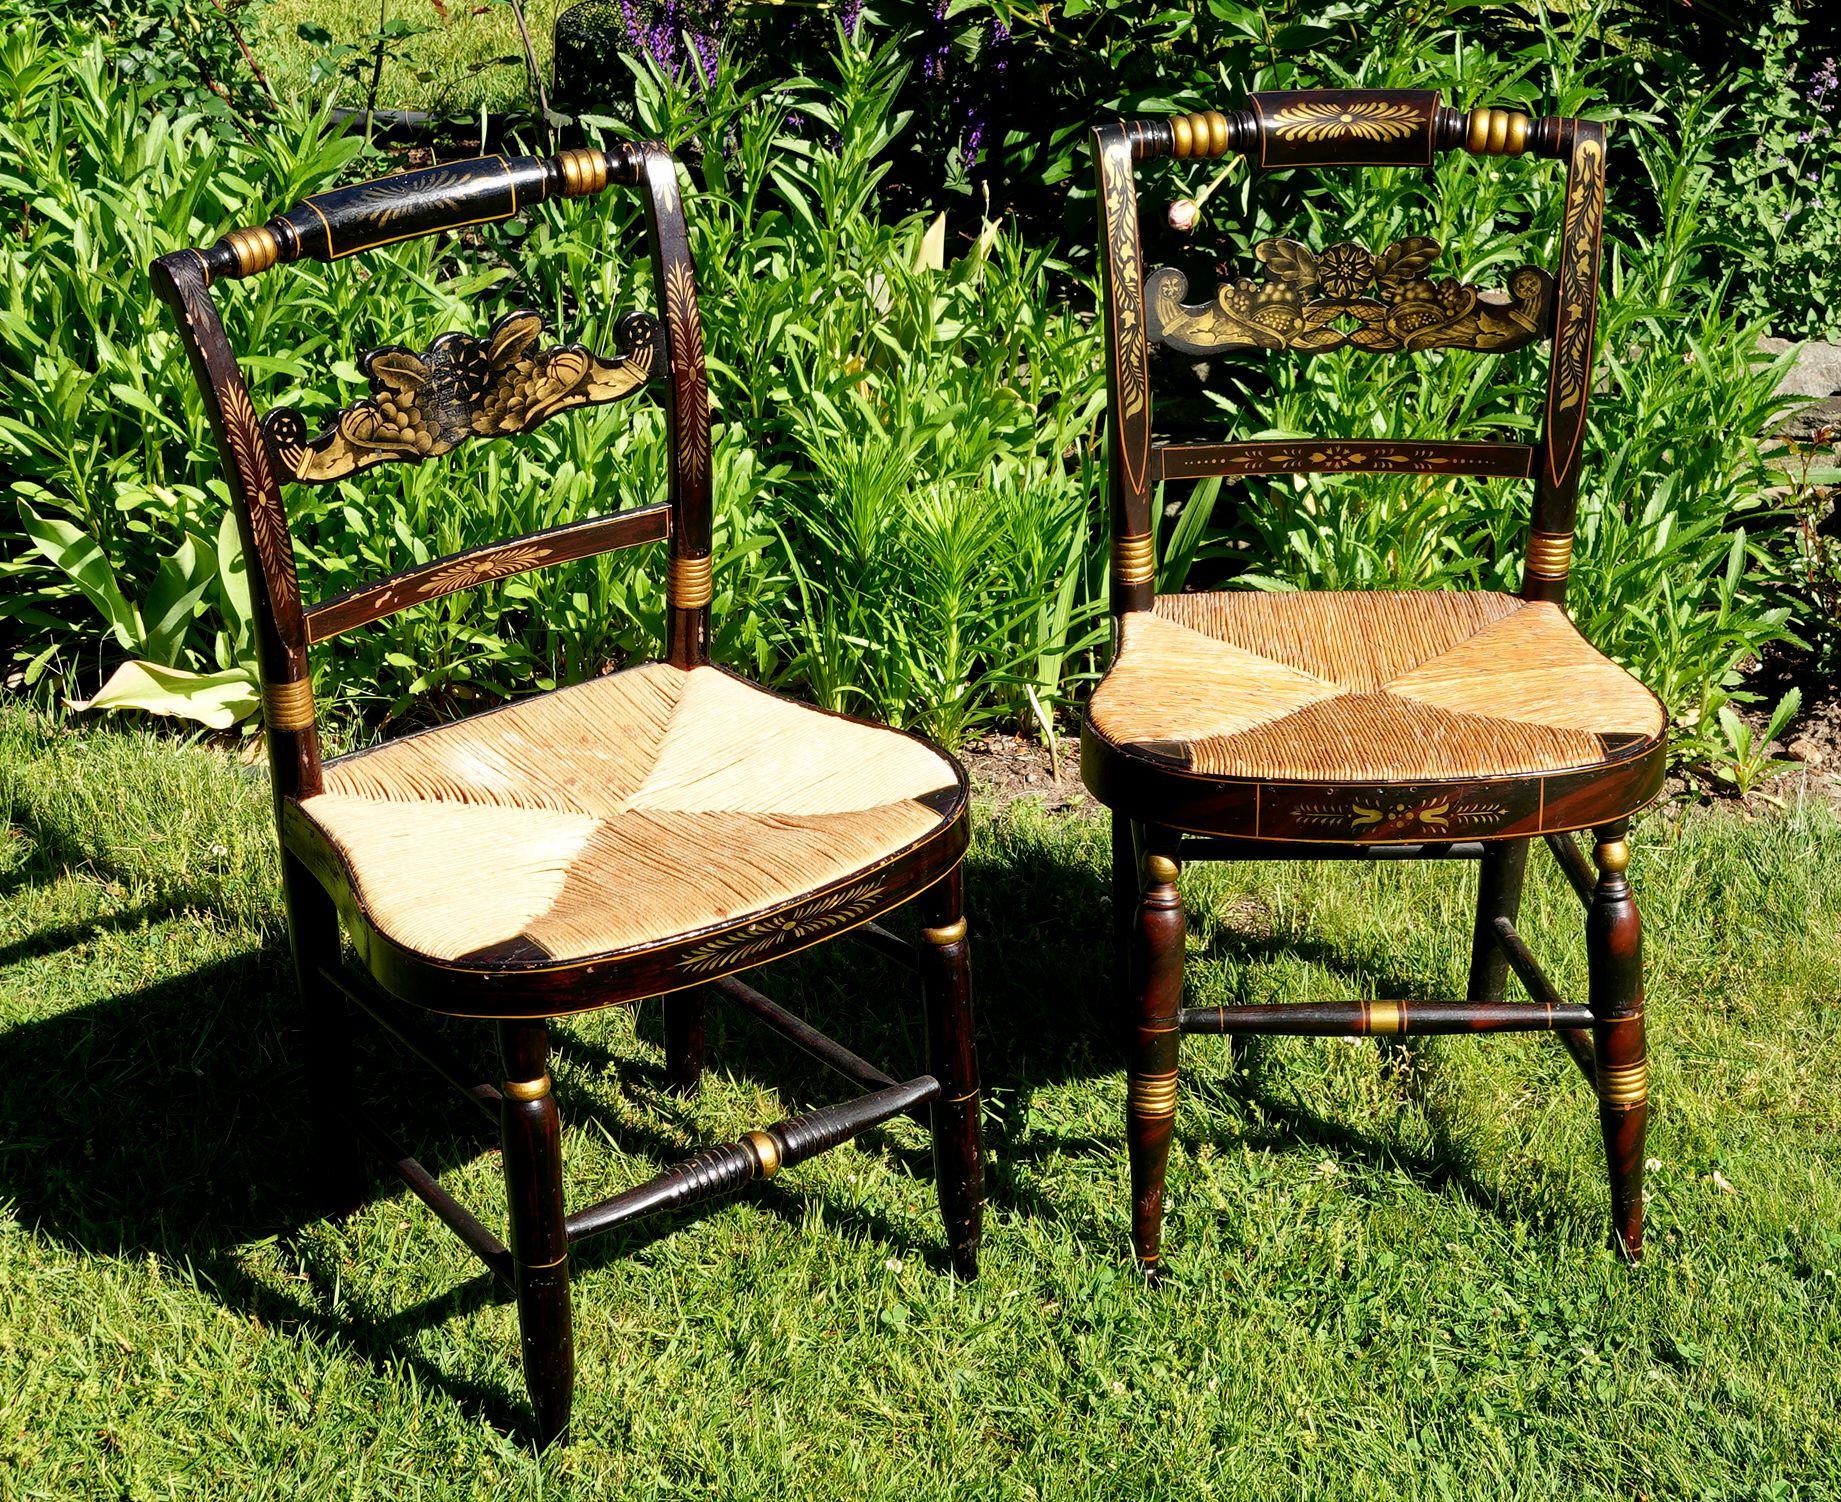 Pair of New England Hitchcock Style/Fancy chairs. Hand painted/stenciled with a deep and rich patination from years of good wear. The seats are woven rush seats and are in very good condition.

Width: 17 in (43.18 cm)
Depth: 15.25 in (38.74